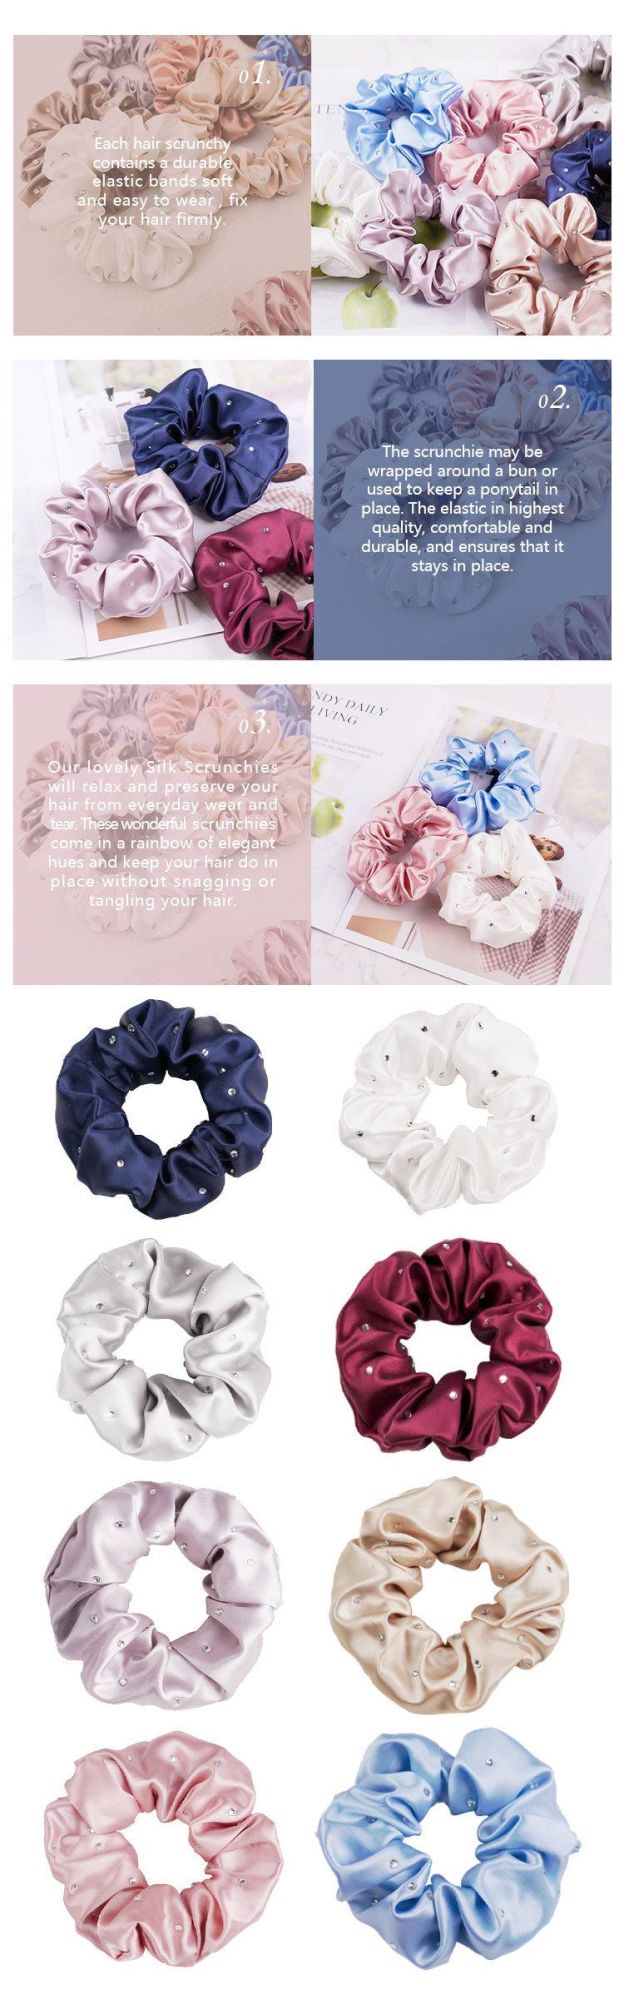 5cm Luxury Style Silk Scrunchies with High Quality Srystal for Girls